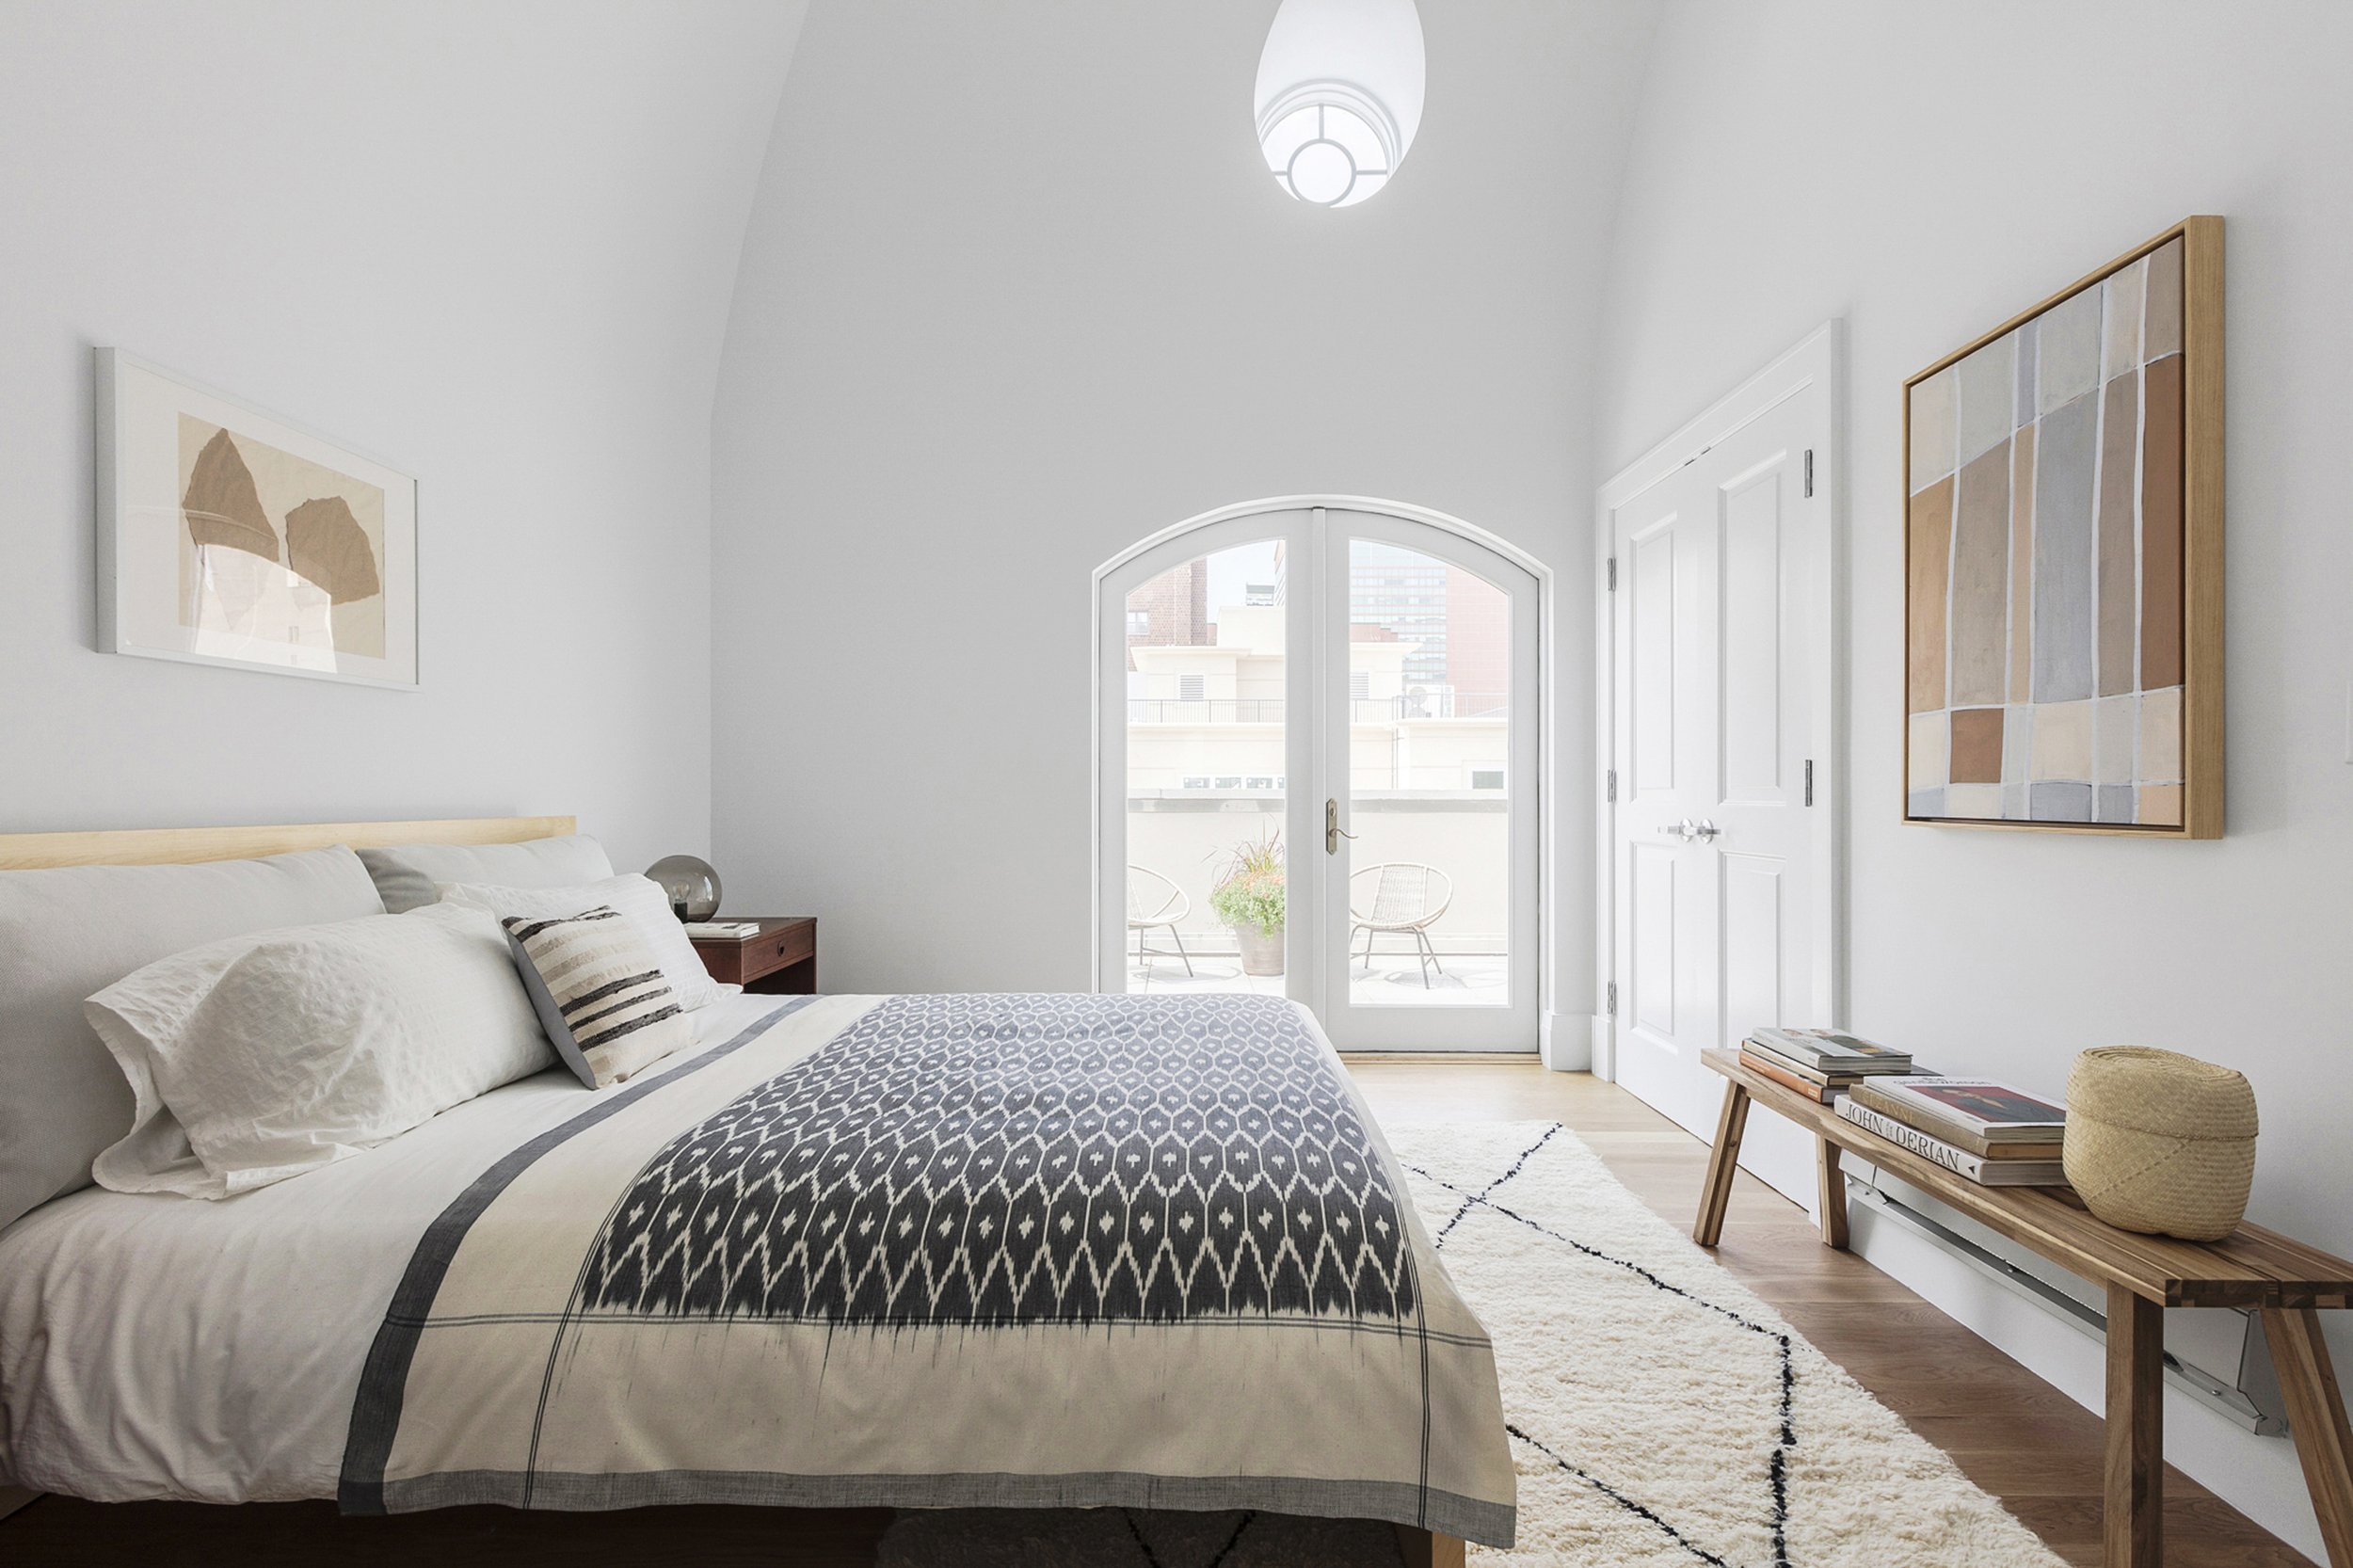  Hovey Design  South Oxford Street   The principal bedroom in this large ceiling three bedroom penthouse condo offers three private outdoor spaces with views down tree lined streets right by Brooklyn’s Barclay’s Center in Fort Greene. 